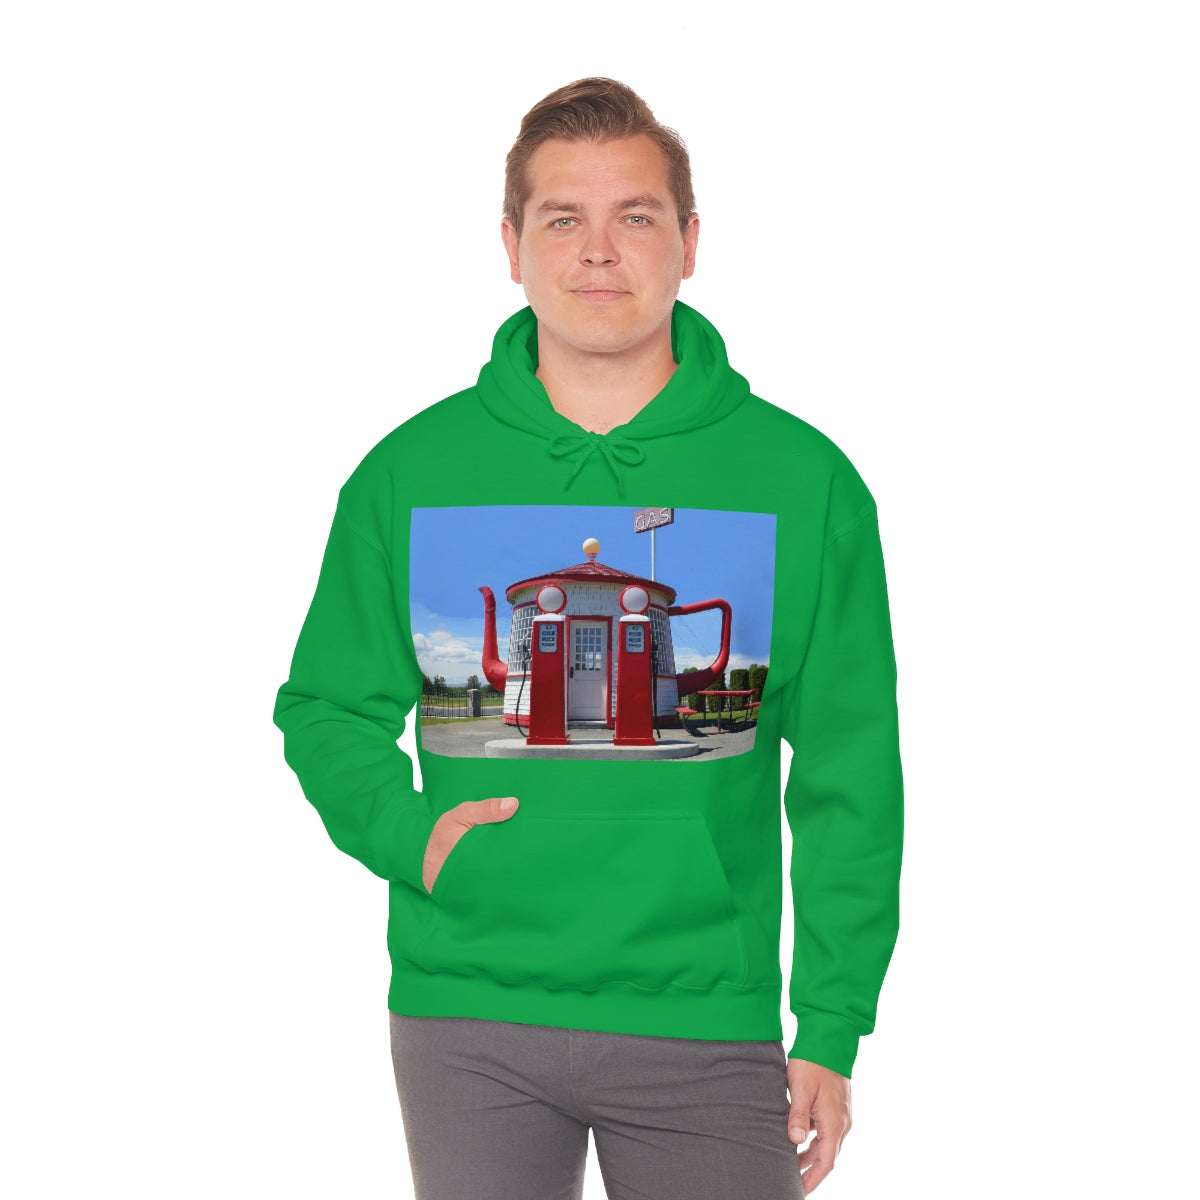 Awesome Teapot Dome Service Station - Unisex Heavy Blend Hooded Sweatshirt - Fry1Productions